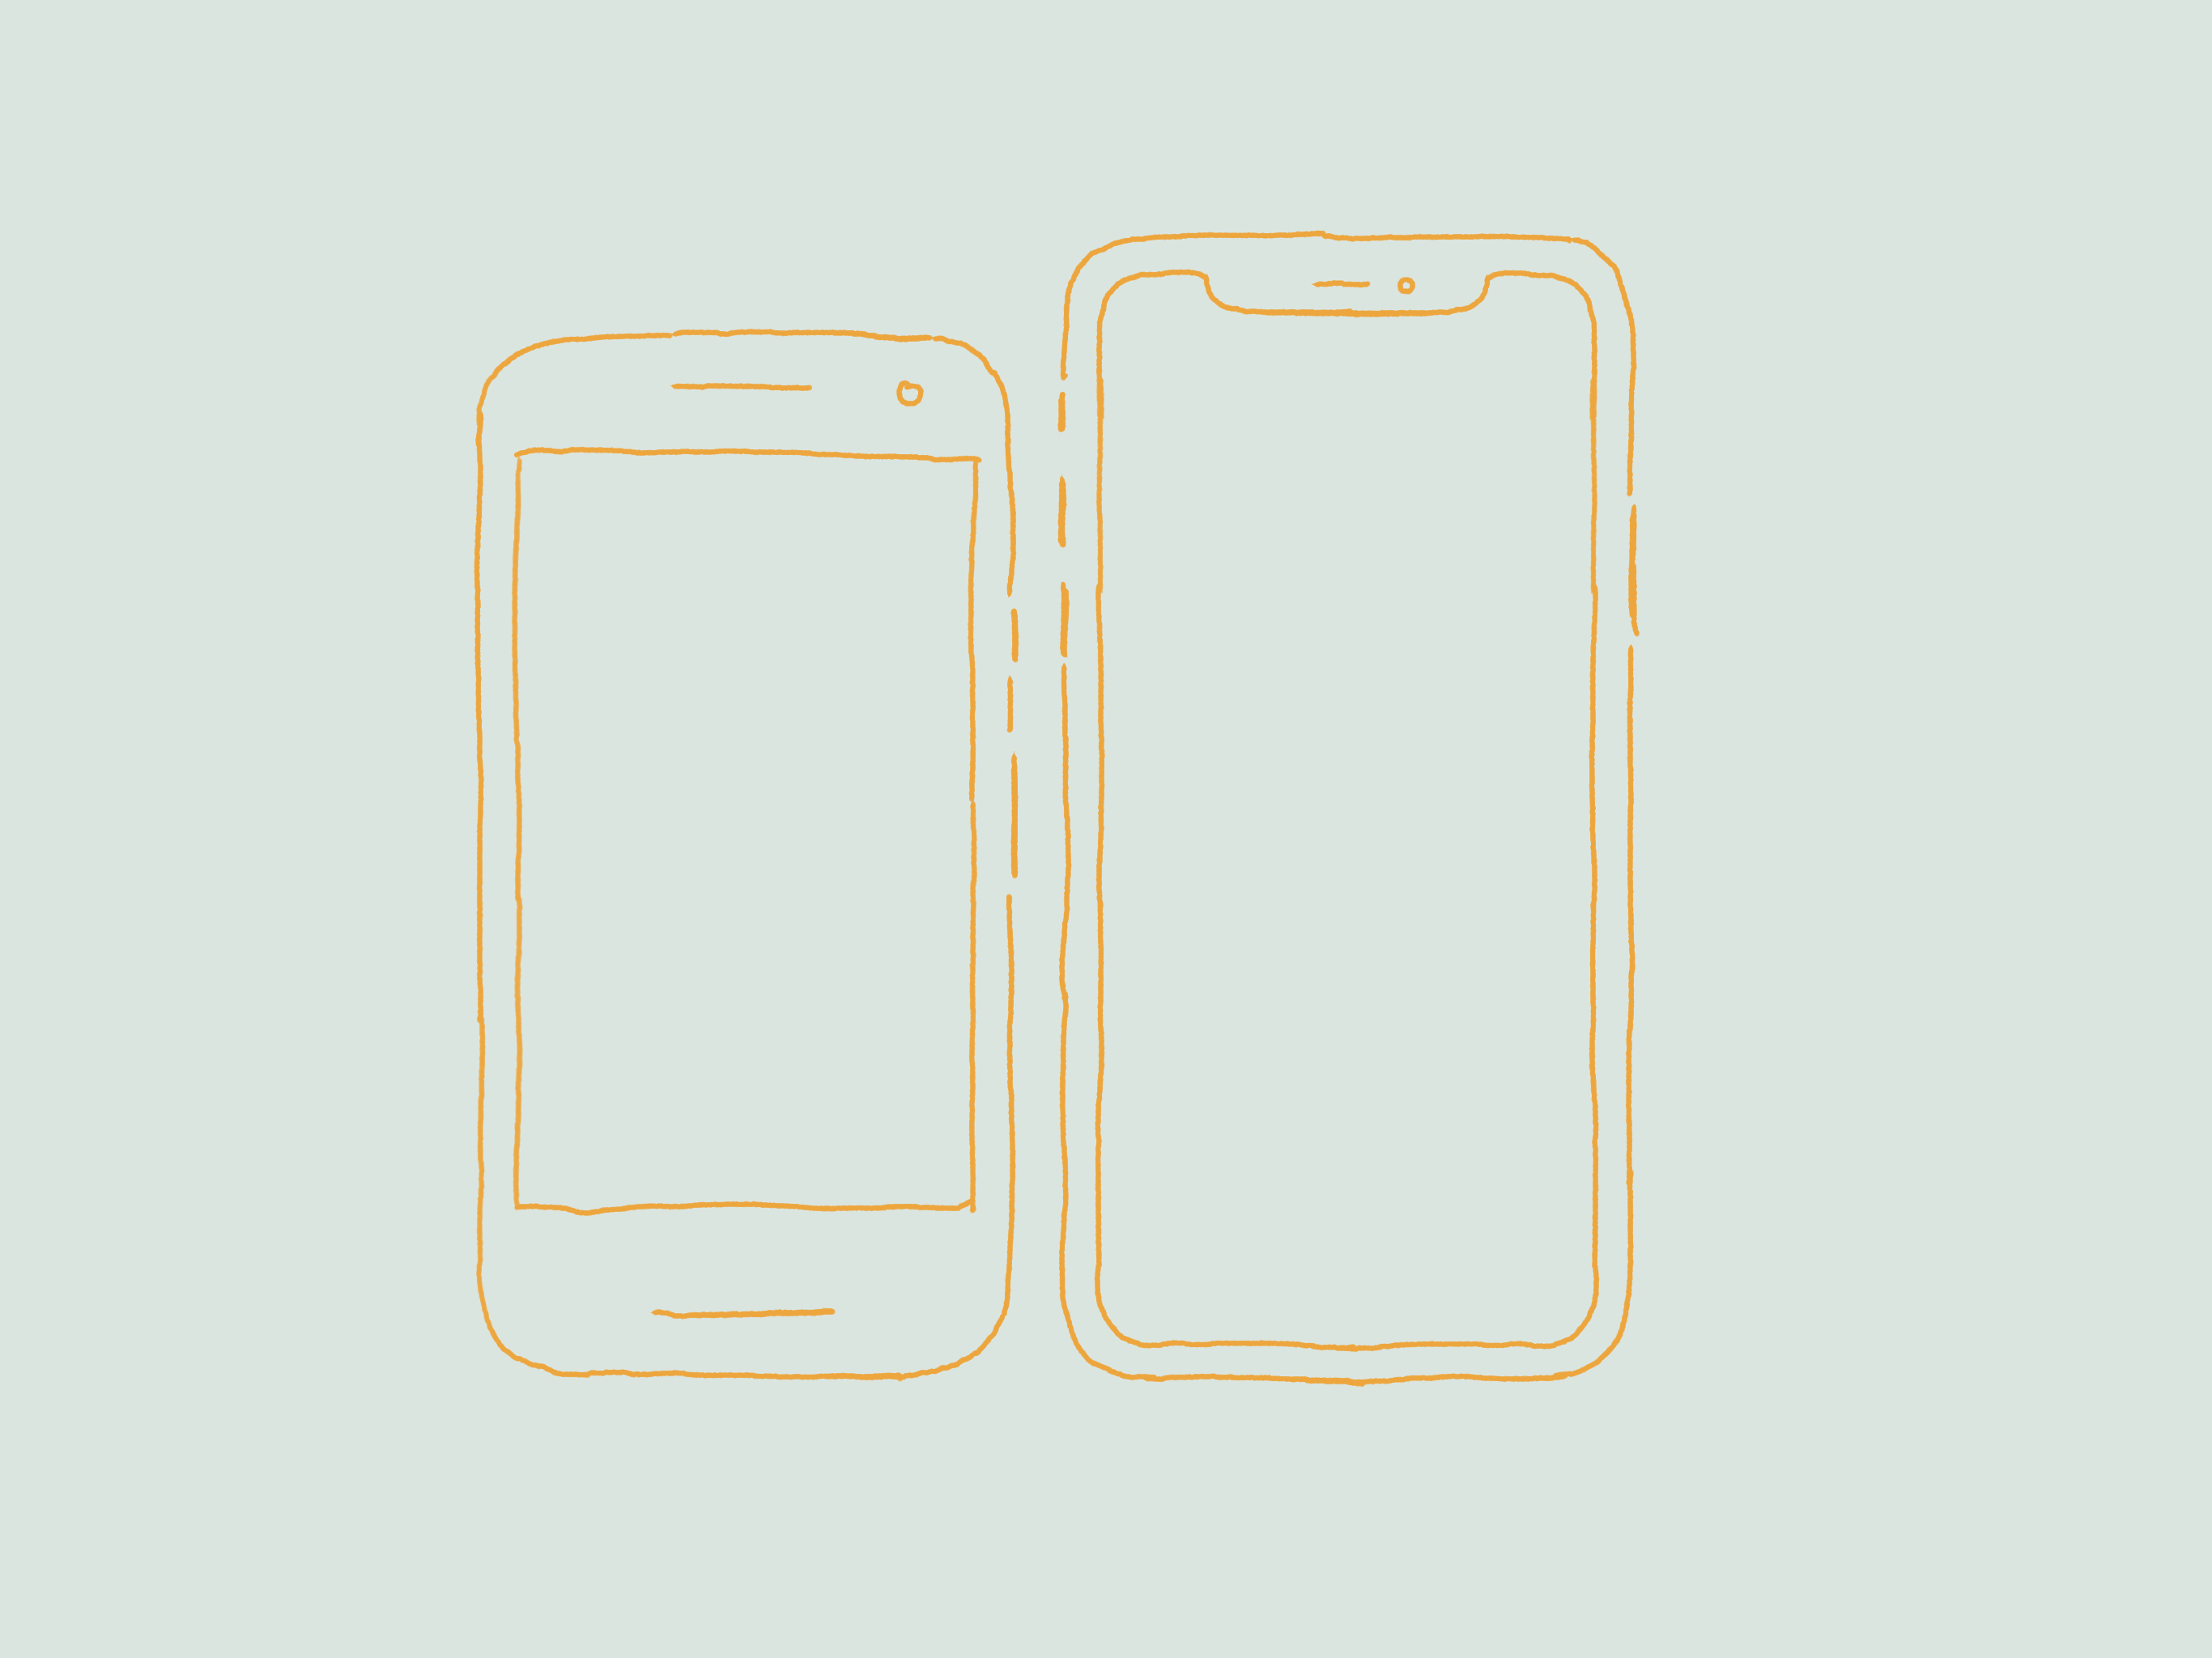 Outlines of an iOS and Android device